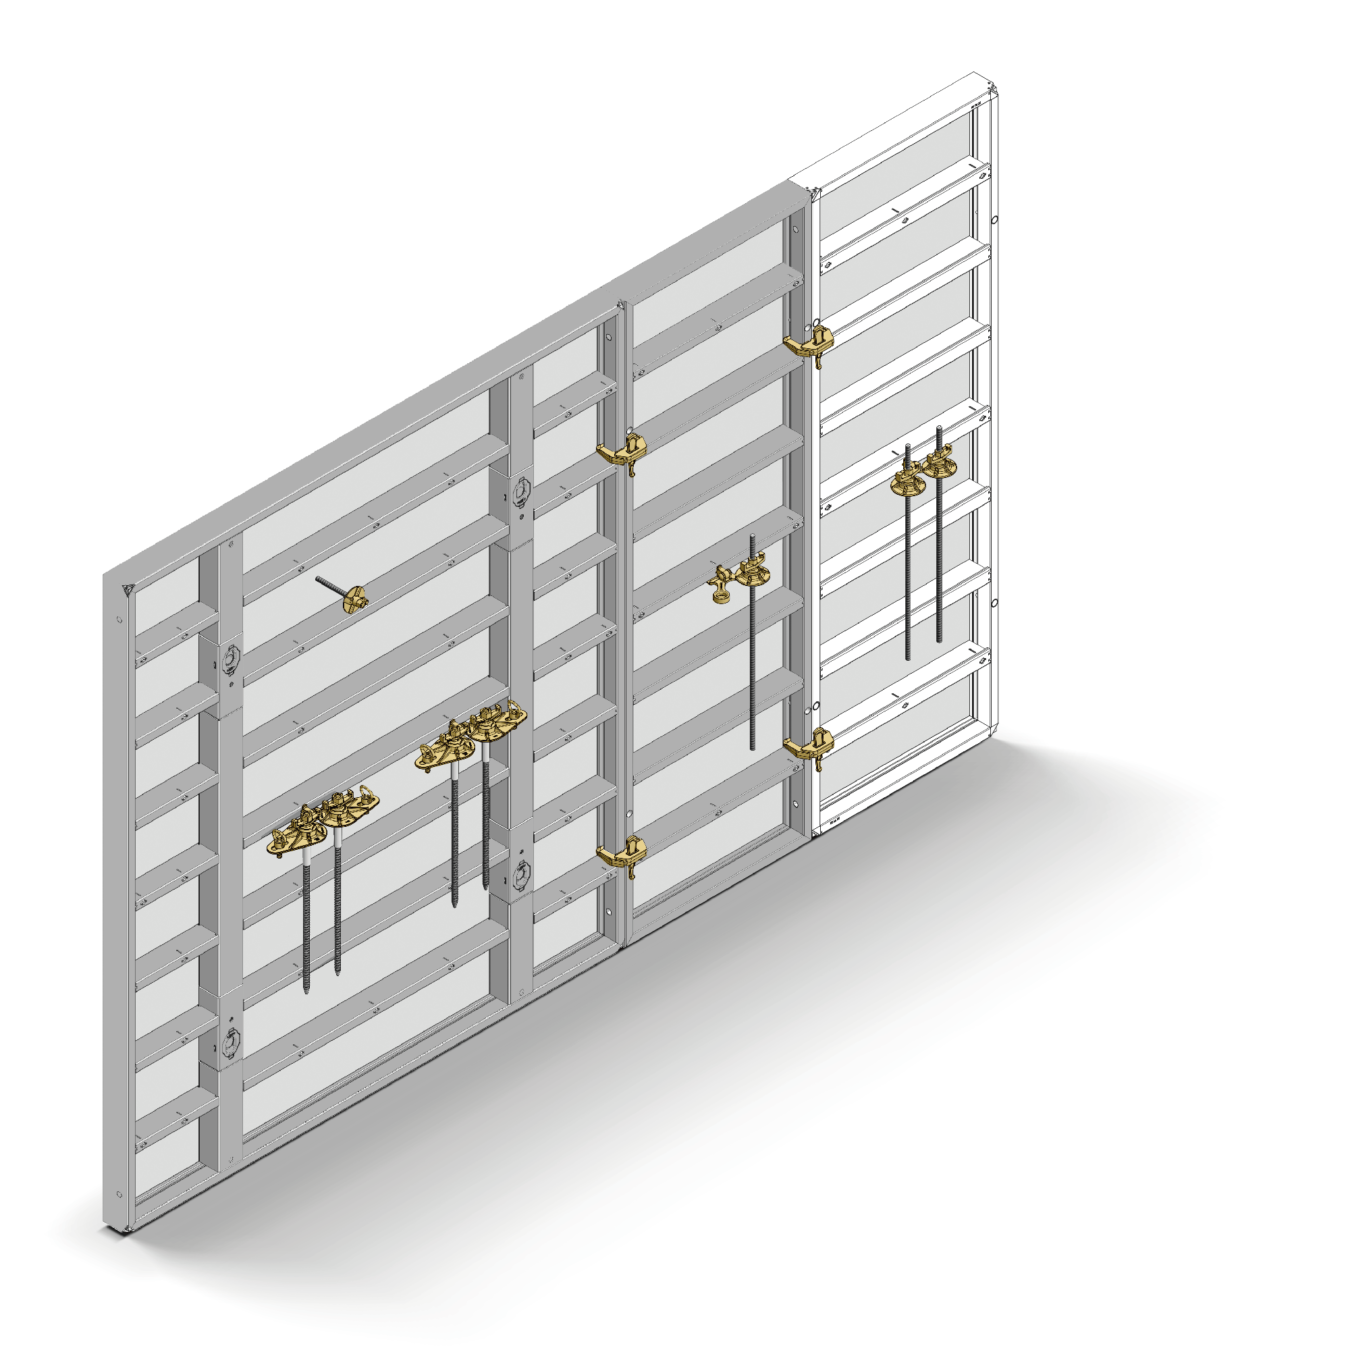 An illustration of two formwork systems fitted together